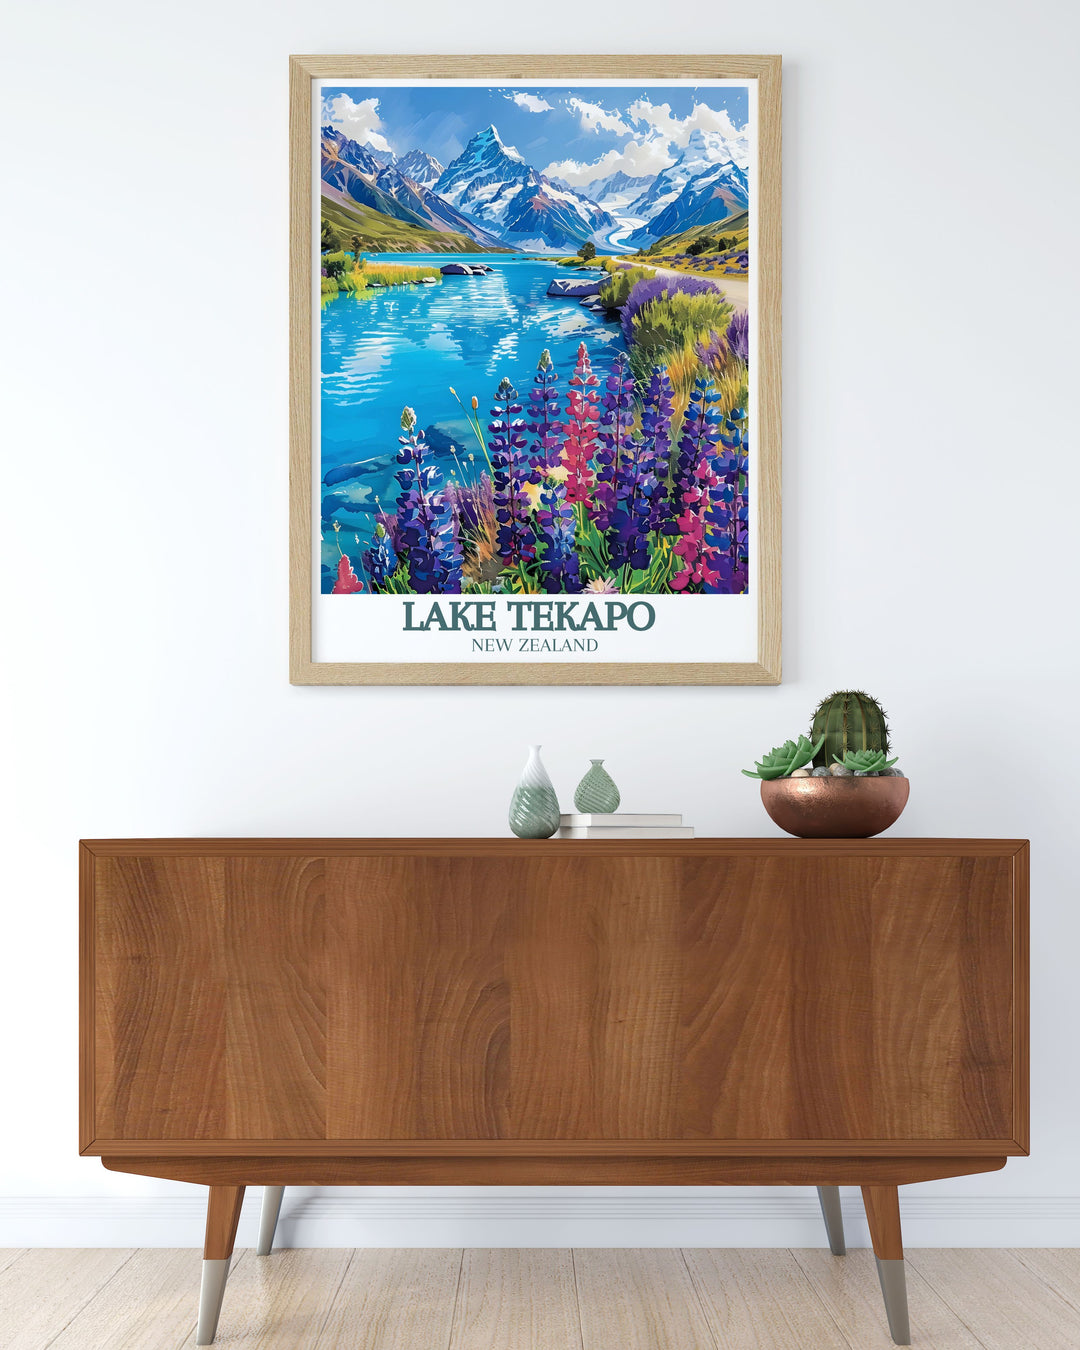 Celebrating New Zealands rich natural heritage, this poster showcases scenes that highlight the countrys iconic landscapes. Perfect for those who love exploring nature, this artwork brings the beauty of New Zealand into your home.